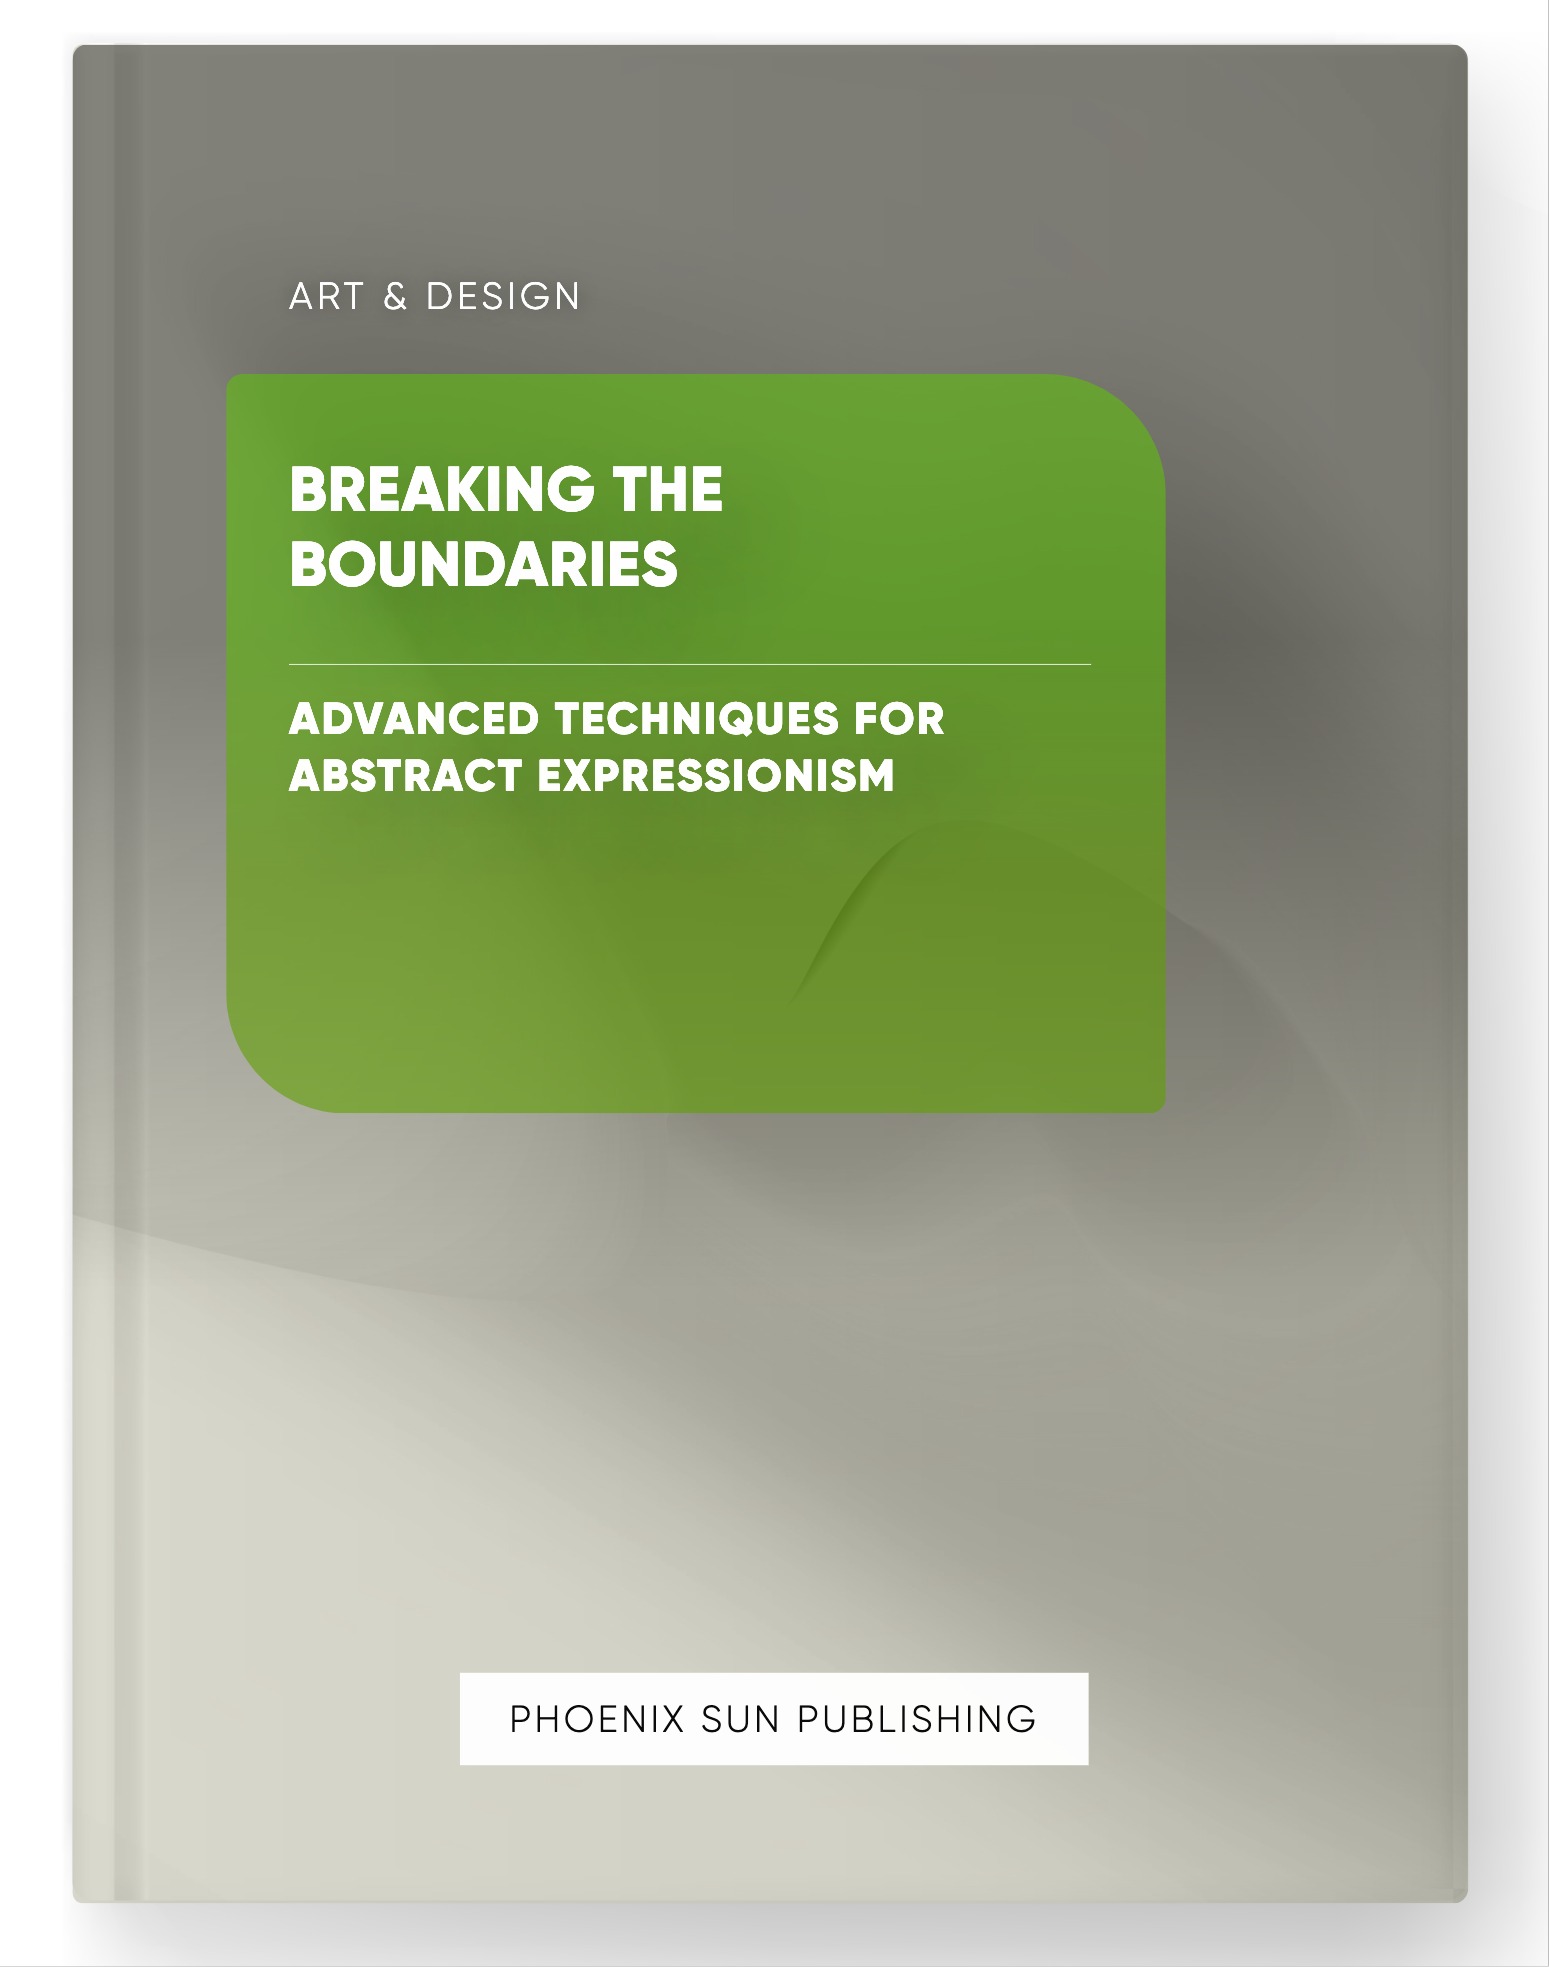 Breaking the Boundaries – Advanced Techniques for Abstract Expressionism